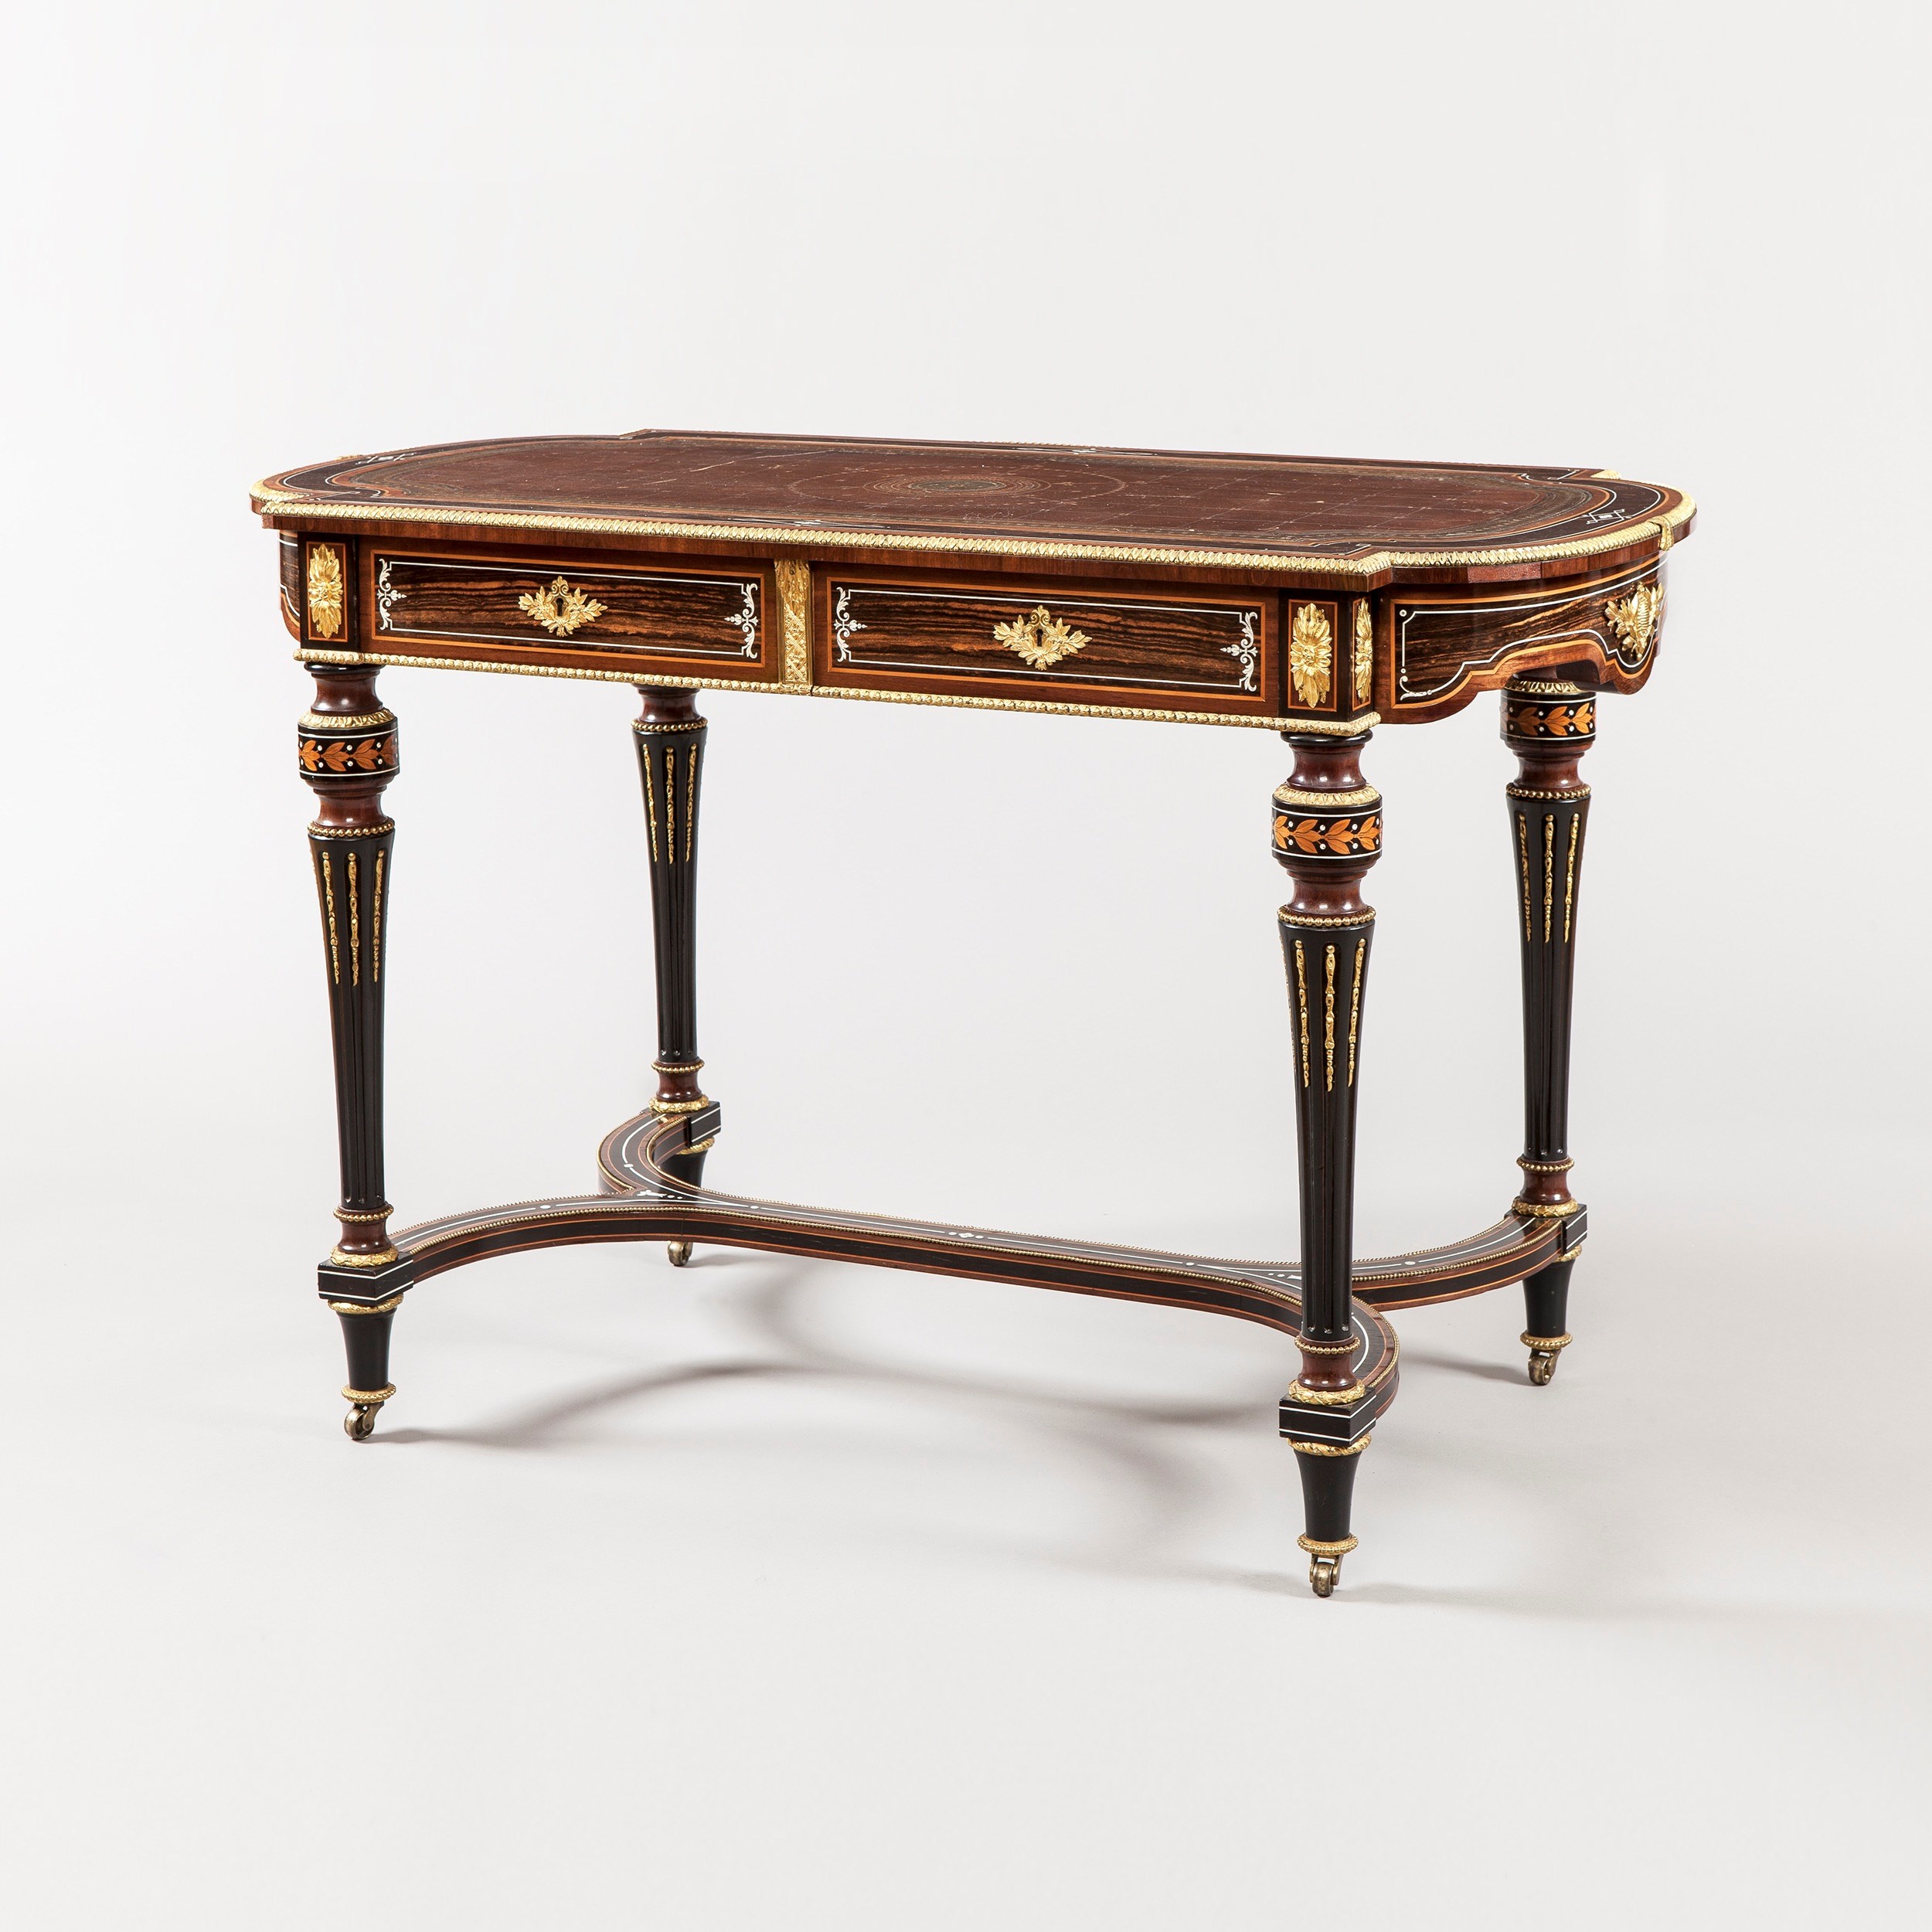 A Louis XVI Centre Writing Table in the Aesthetic Taste,  firmly attributed to Holland & Sons